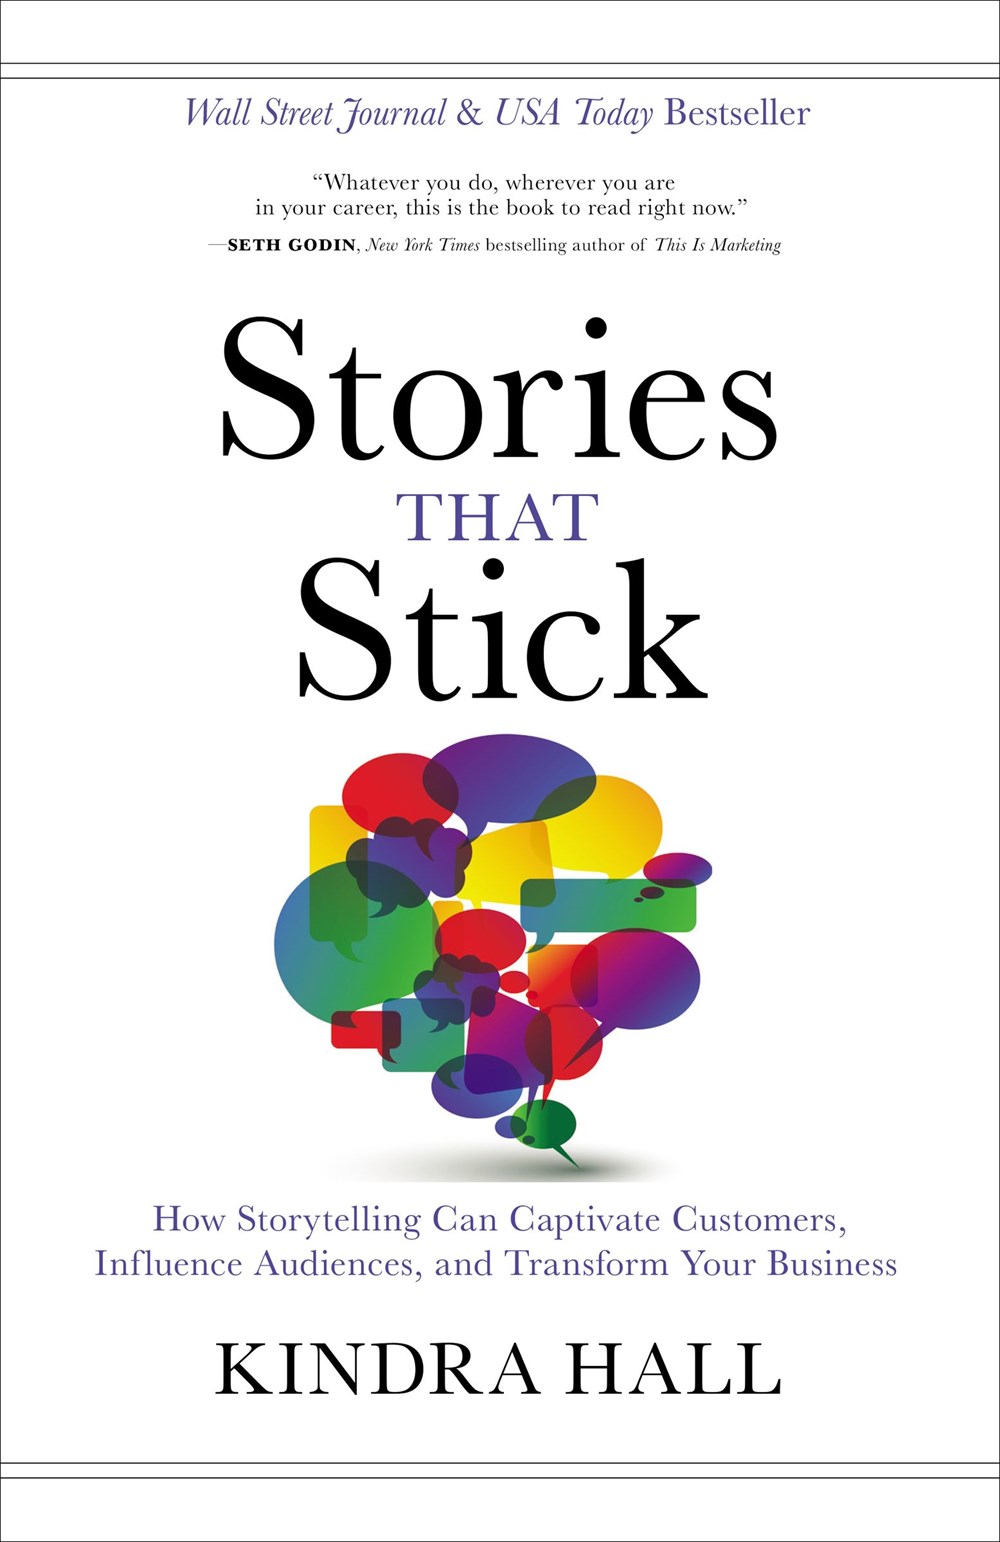 Stories that Stick: How Storytelling Can Captivate Customers cover image